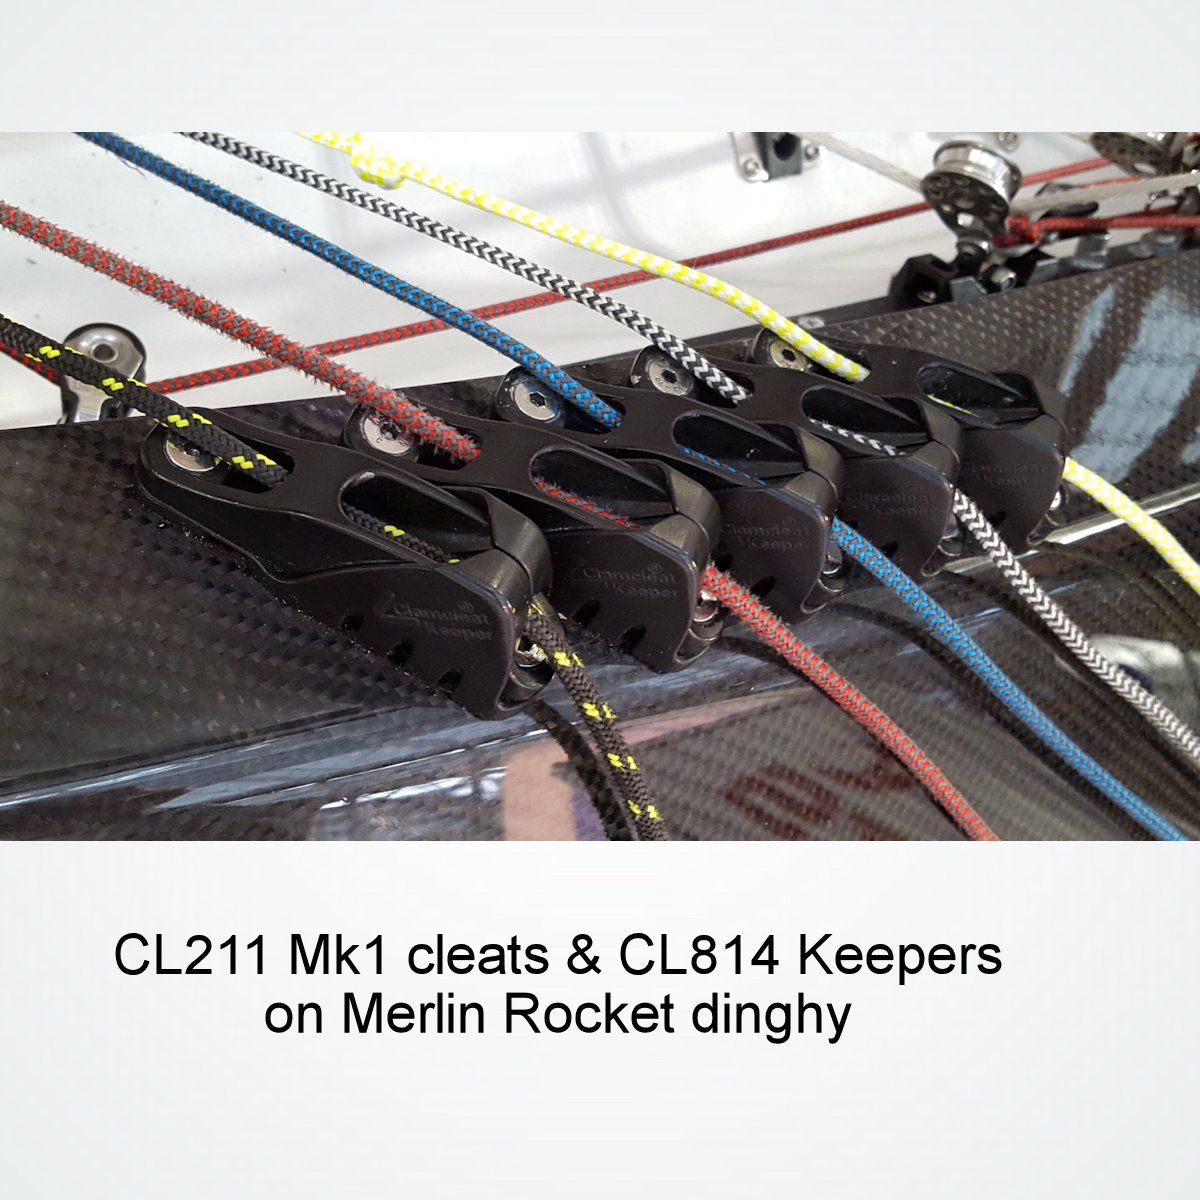 CL814 Keeper for CL203, CL211Mk1,